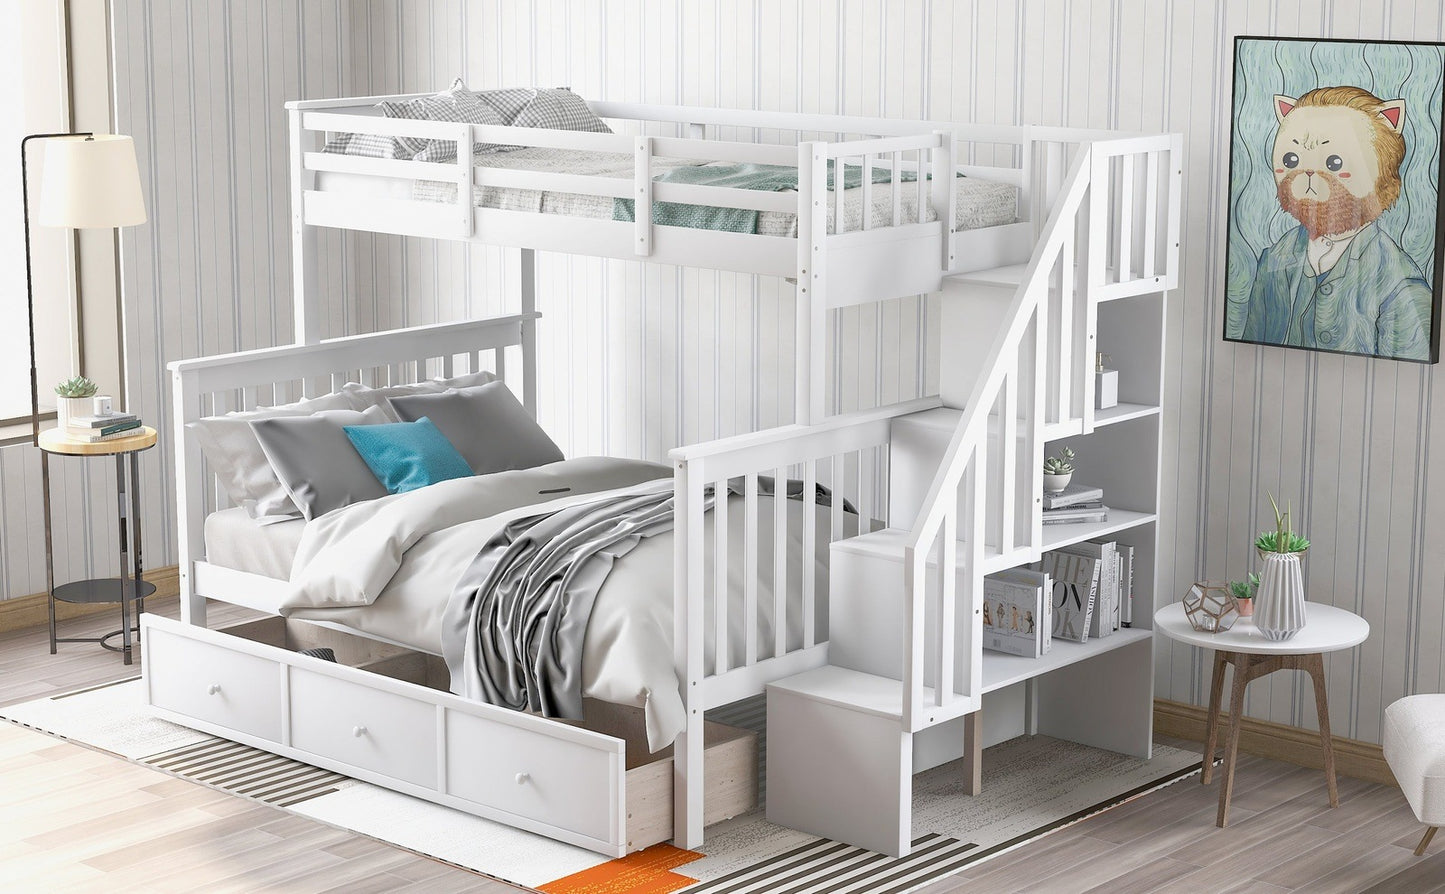 Stairway Twin-Over-Full Bunk Bed with Drawer - White